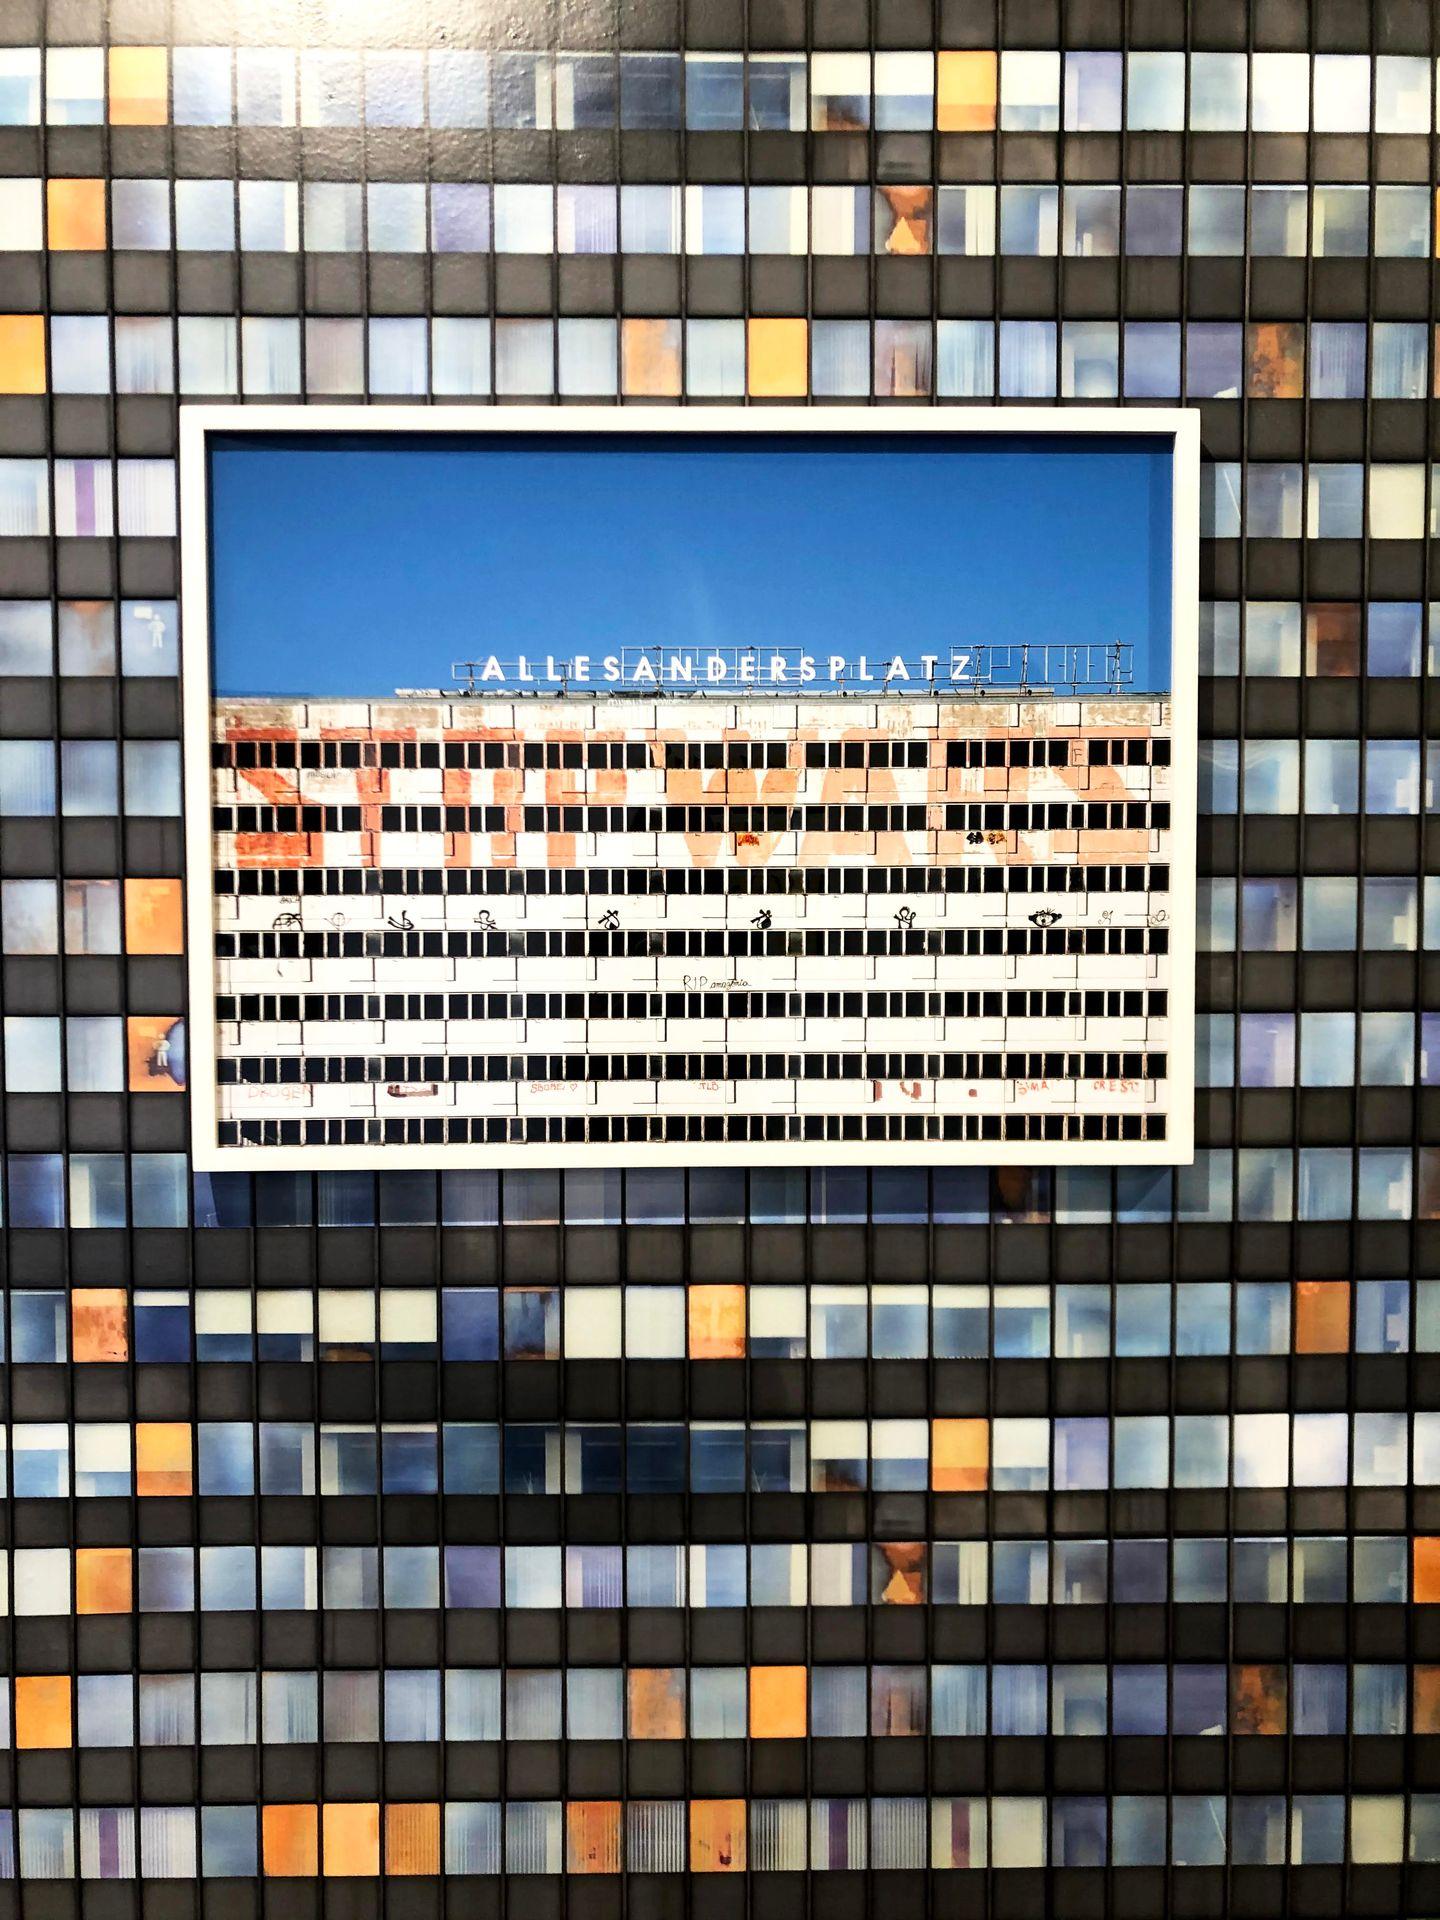 An architectural photograph haning on a wall that looks like a grid.